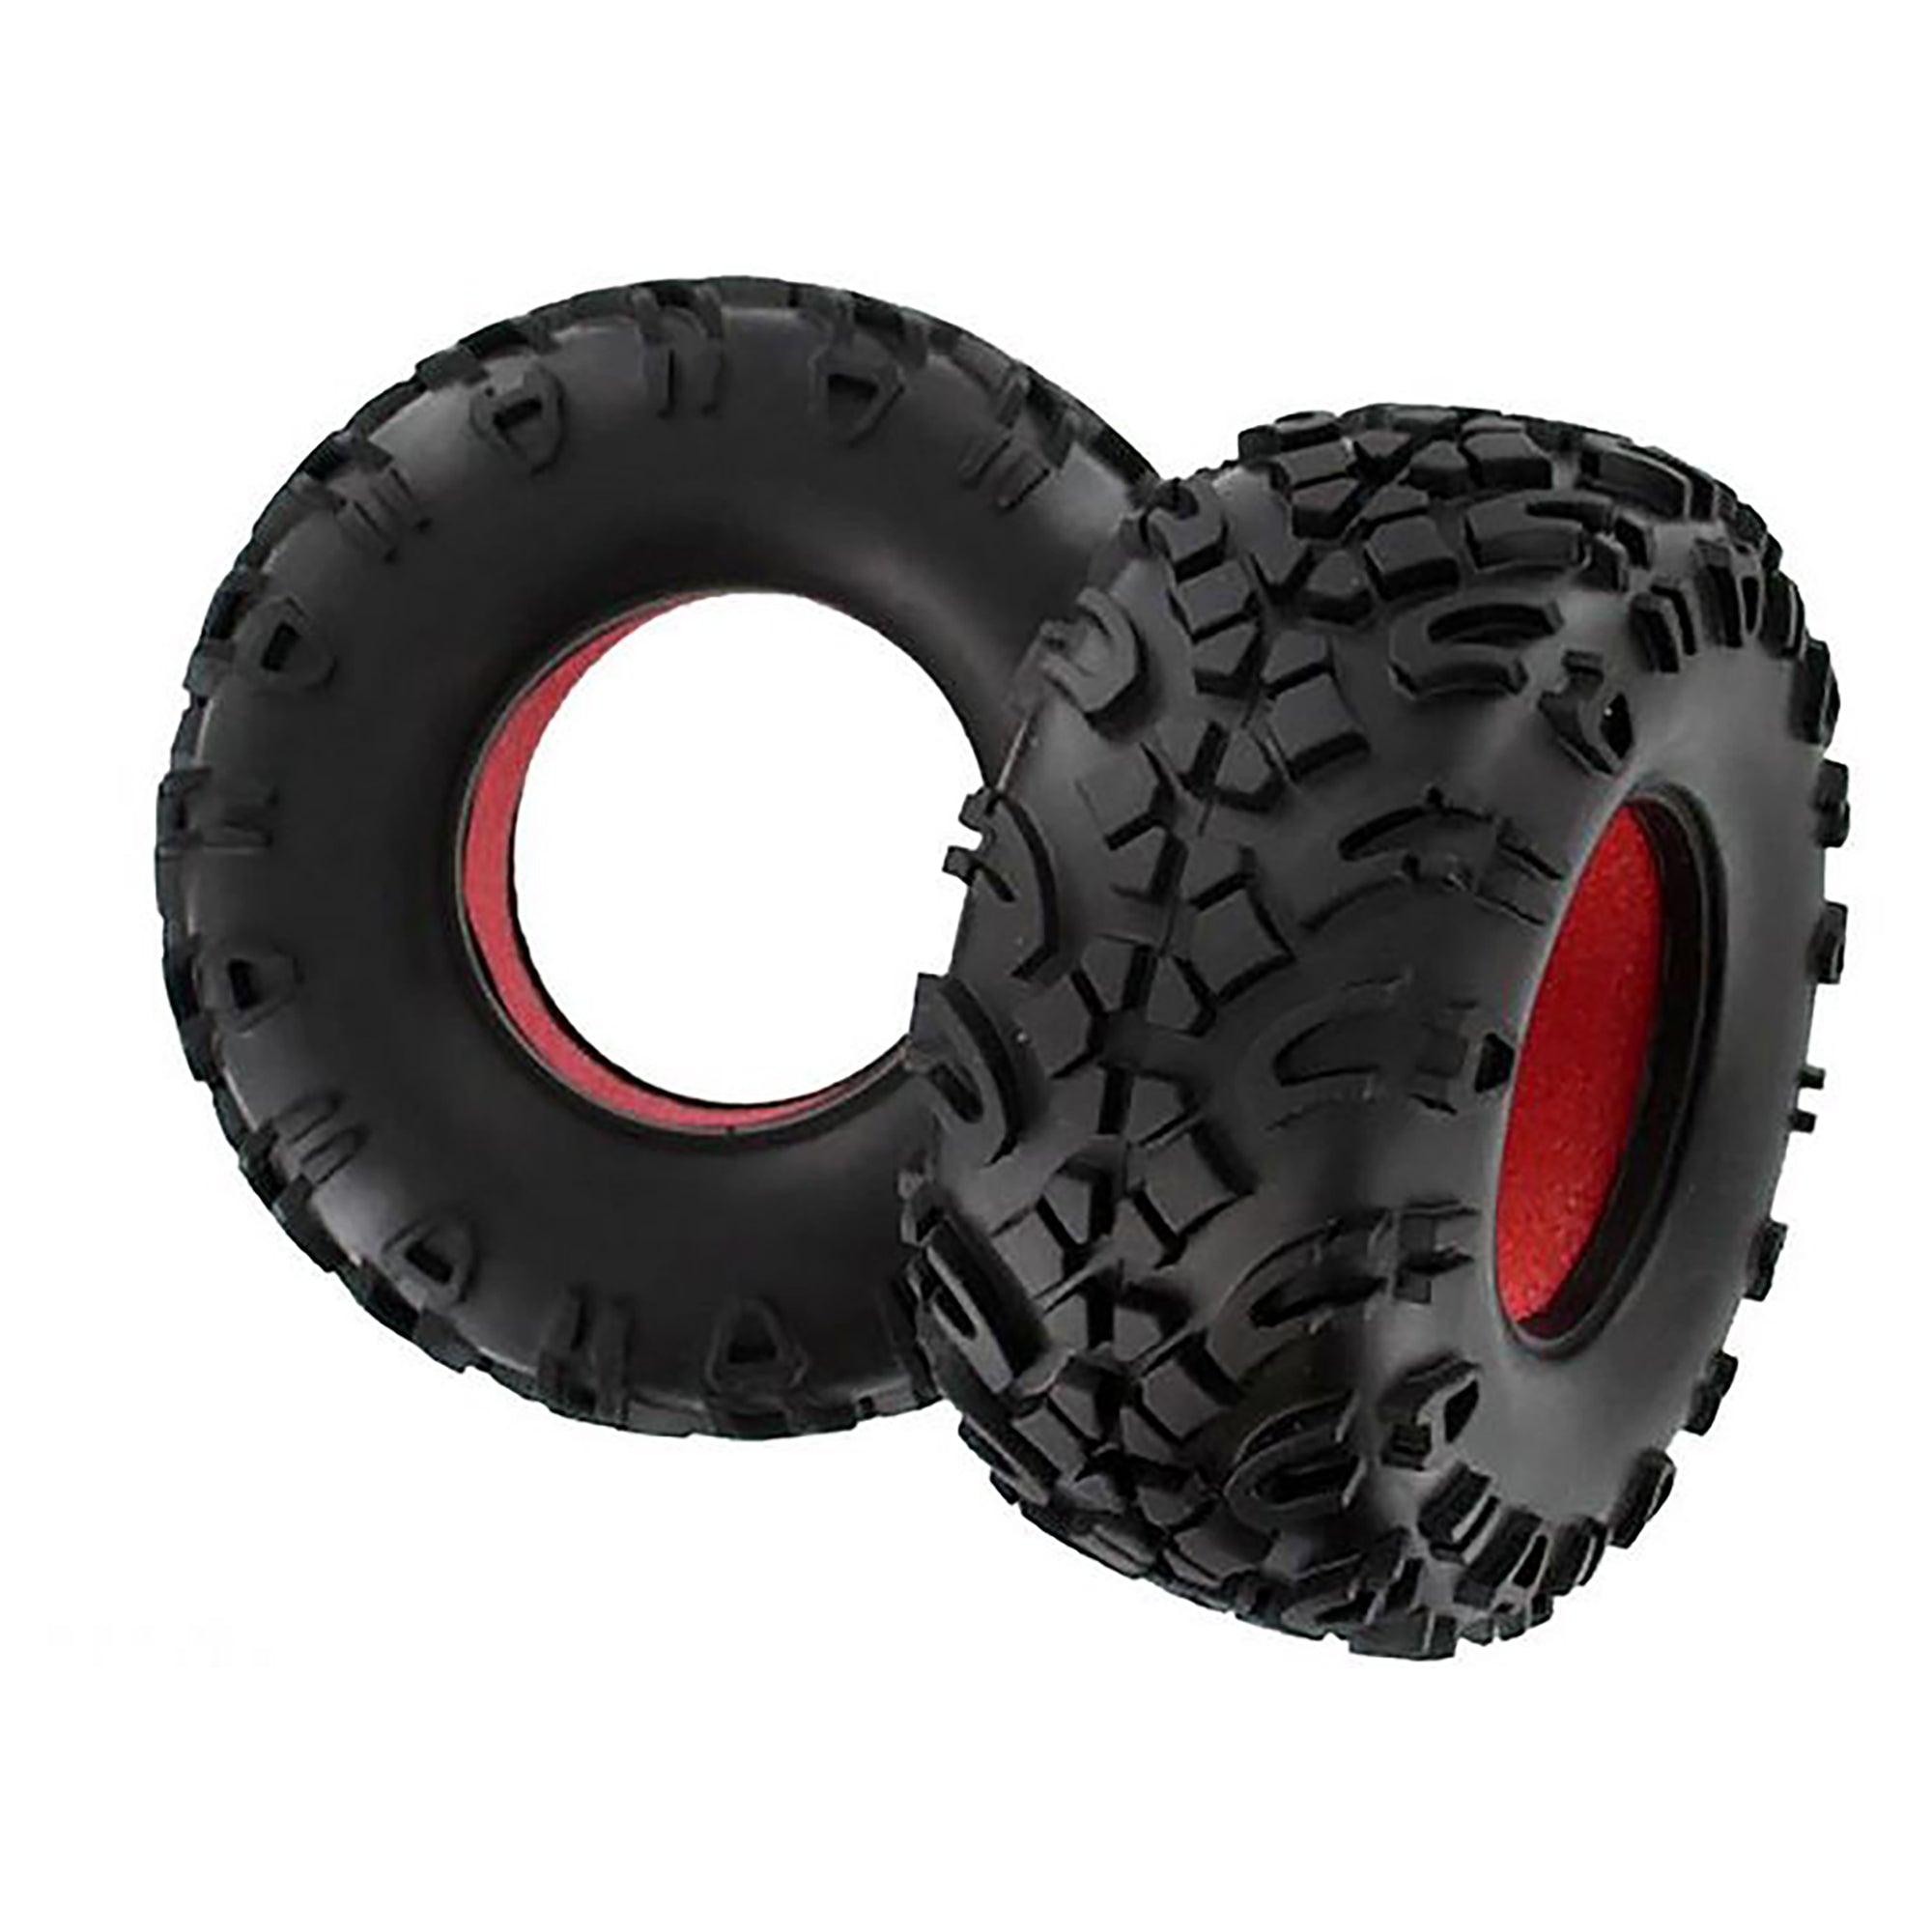 HSP Racing 18013 Tire with Foam (Pack of 2)